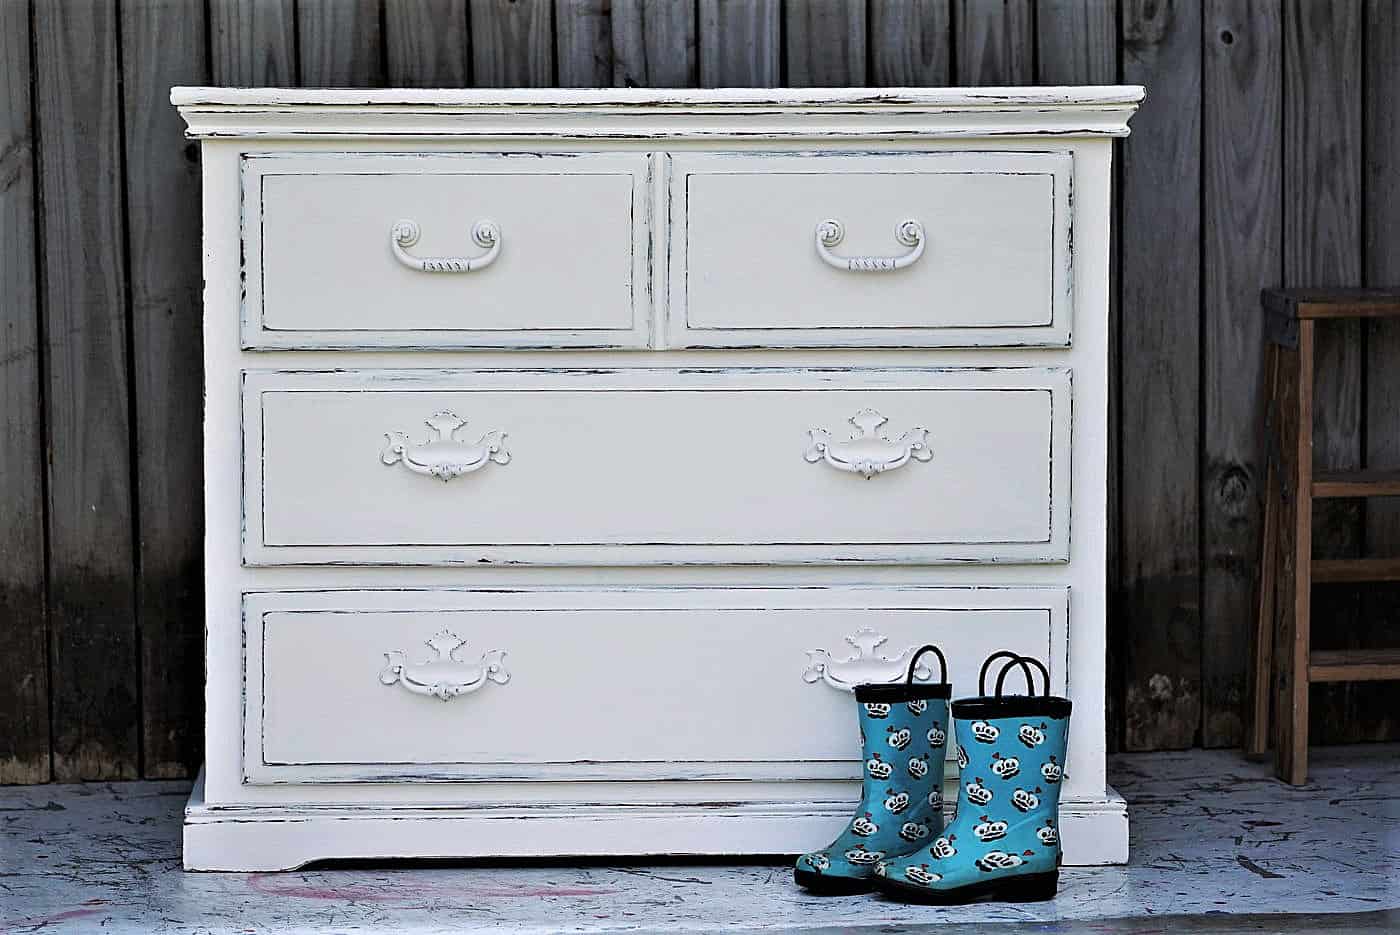 Creating a Rustic Aged look Painting Furniture with Chalk Paint 